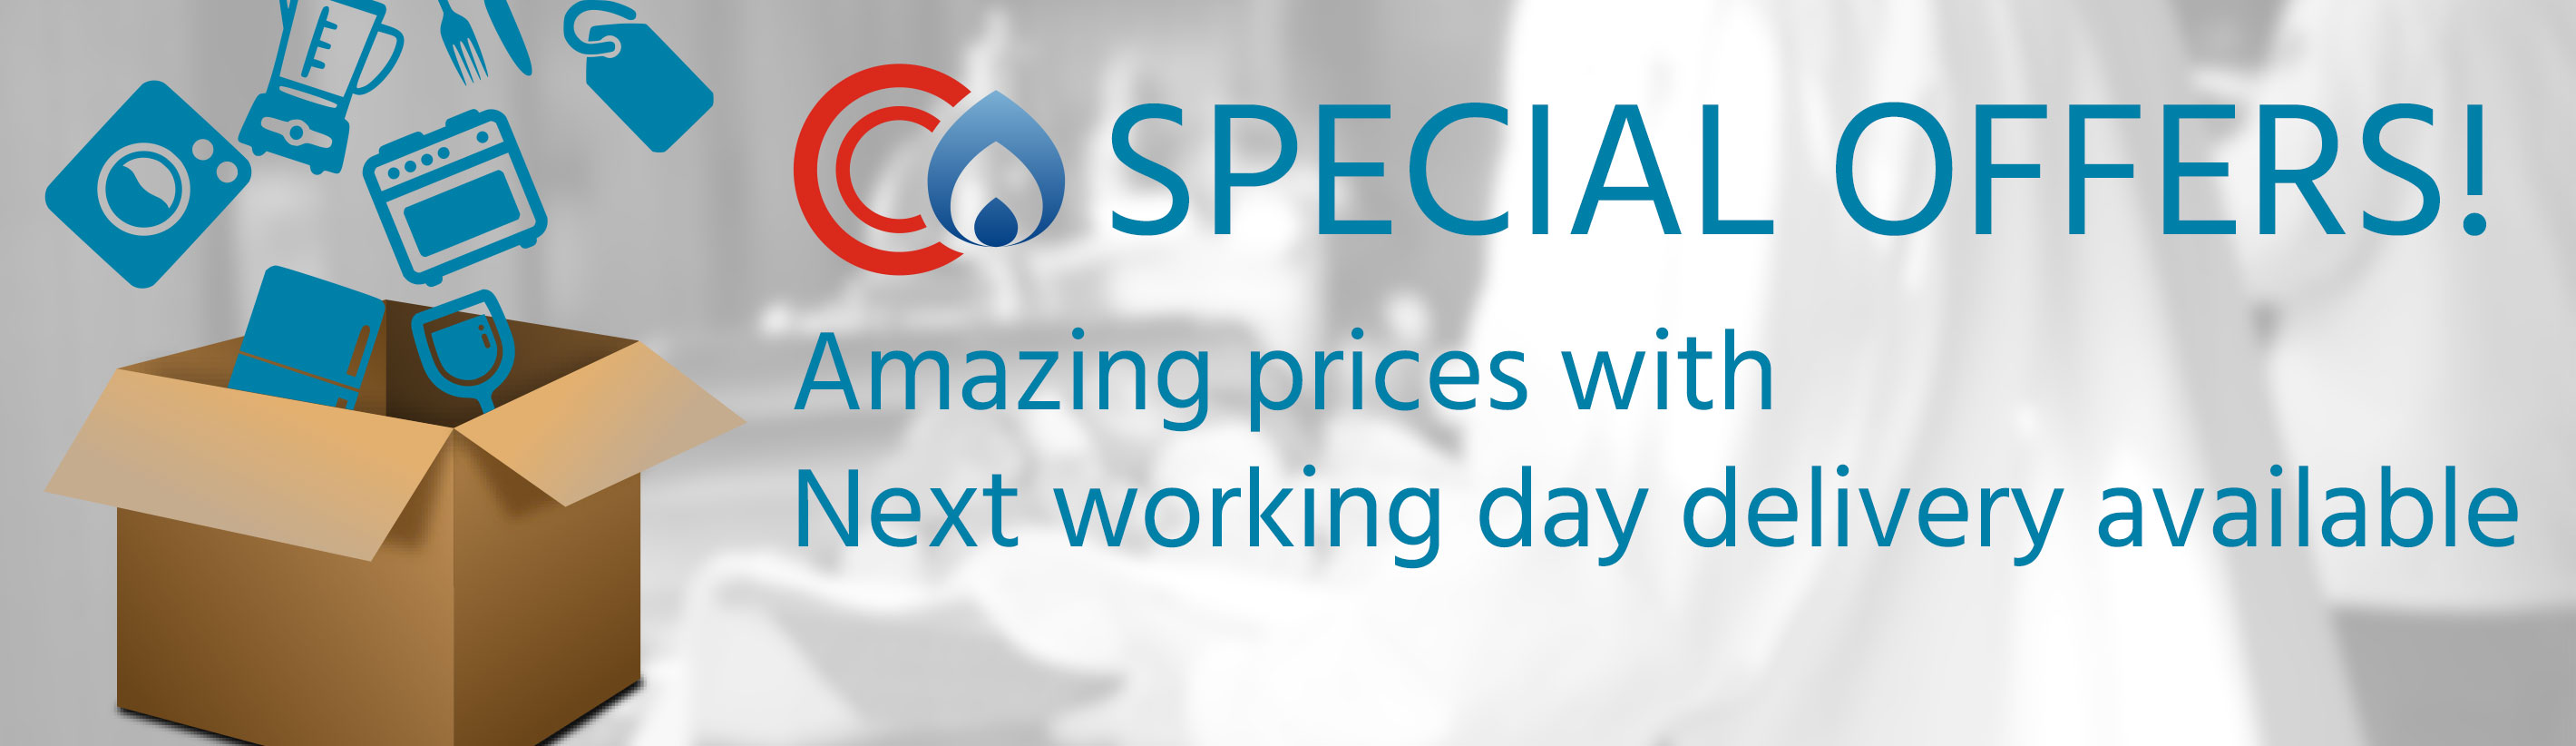 Special Offers, Amazing prices with Next working day delivery available